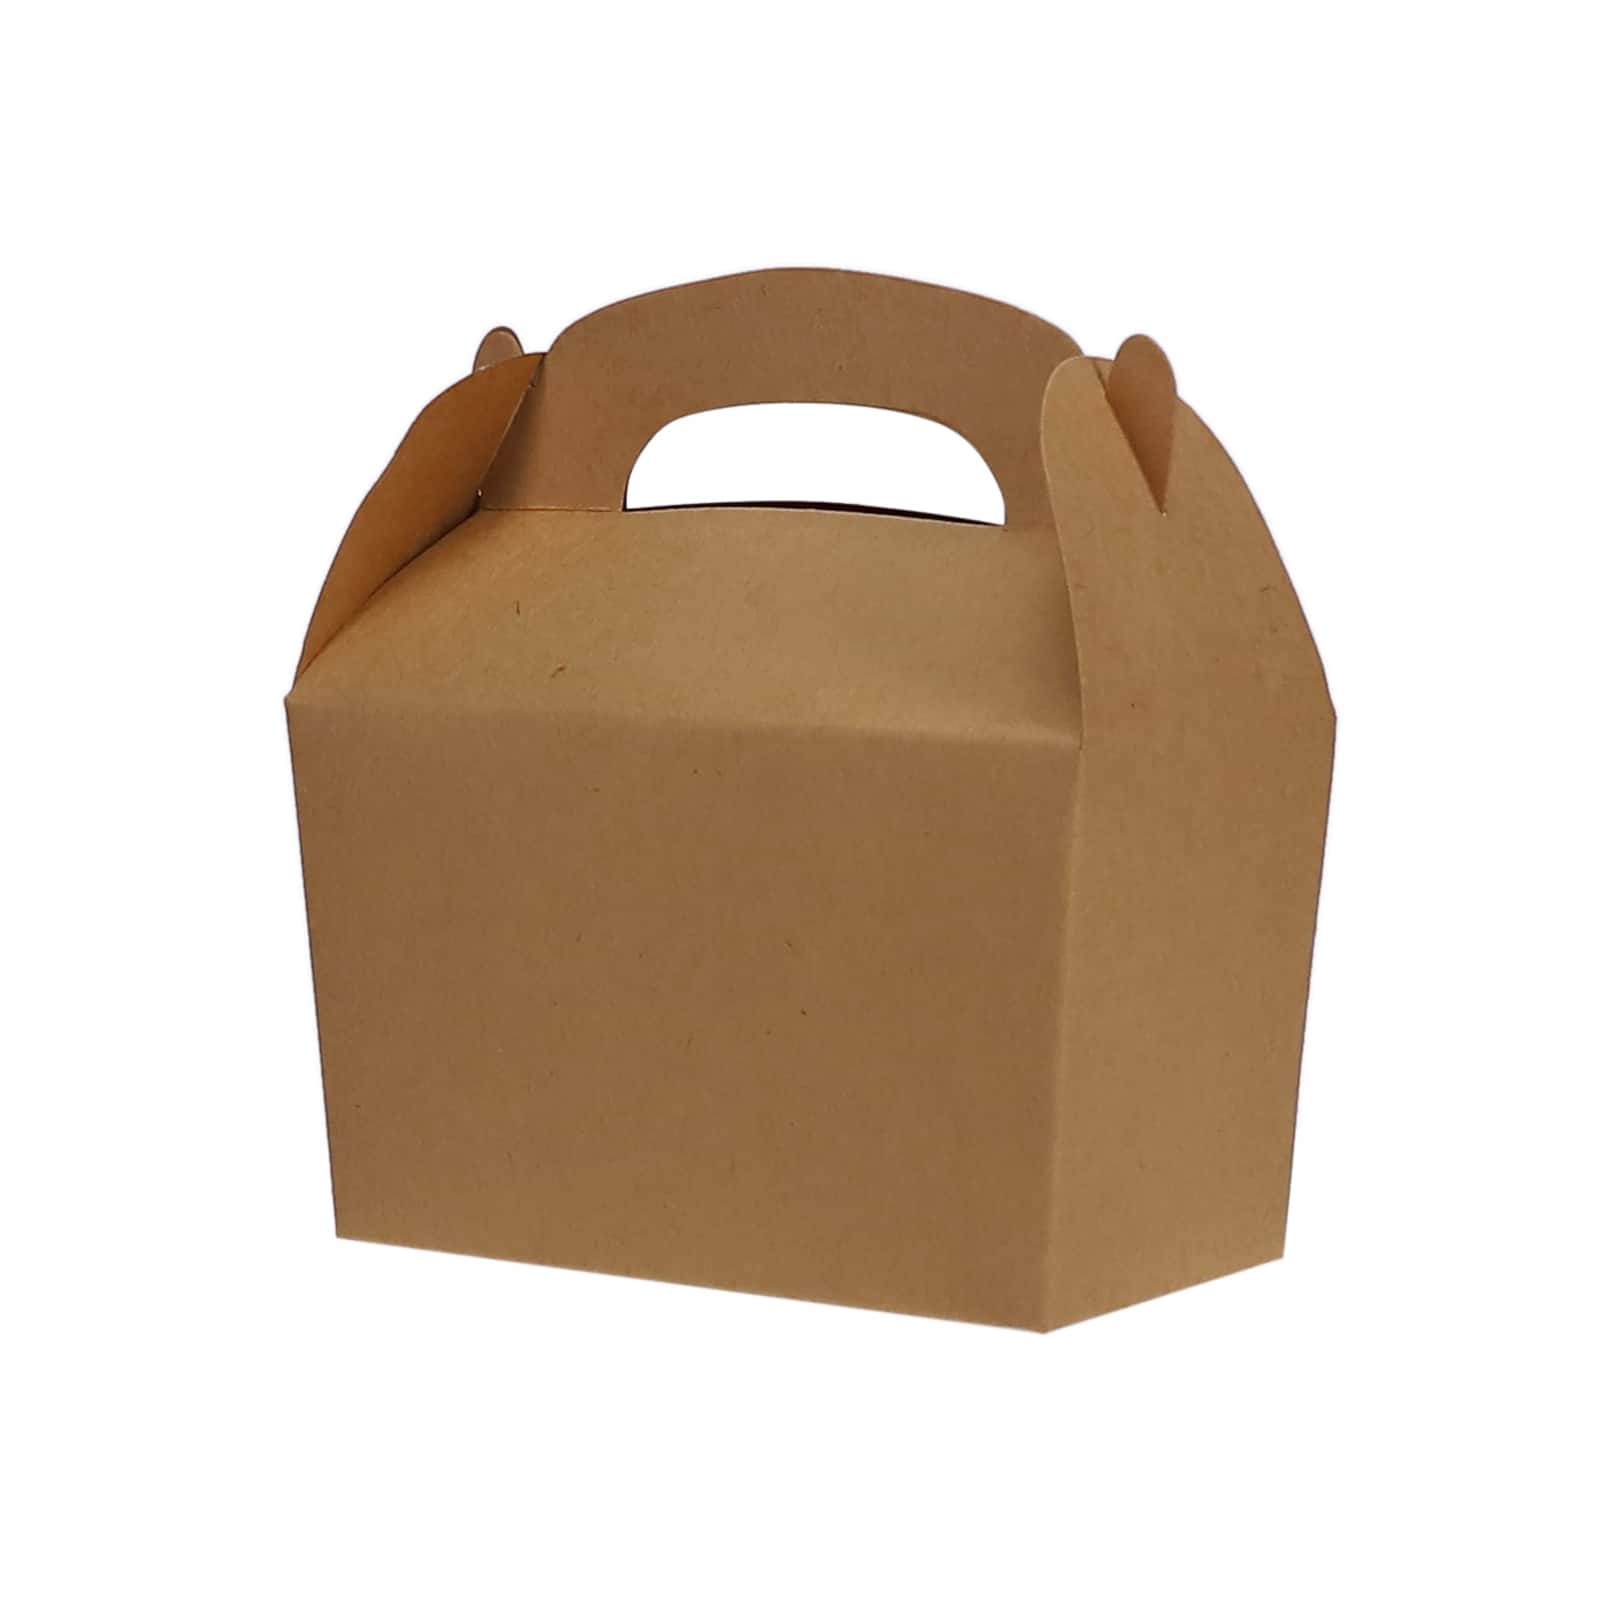 20 Pack 9 x 4.5 x 4.5 Inch Brown Gift Boxes with Lids, Brown Paper Tumbler  Box for Present Wrapping, Shipping, Party Favors, Business Supplies, Easy  to Assemble